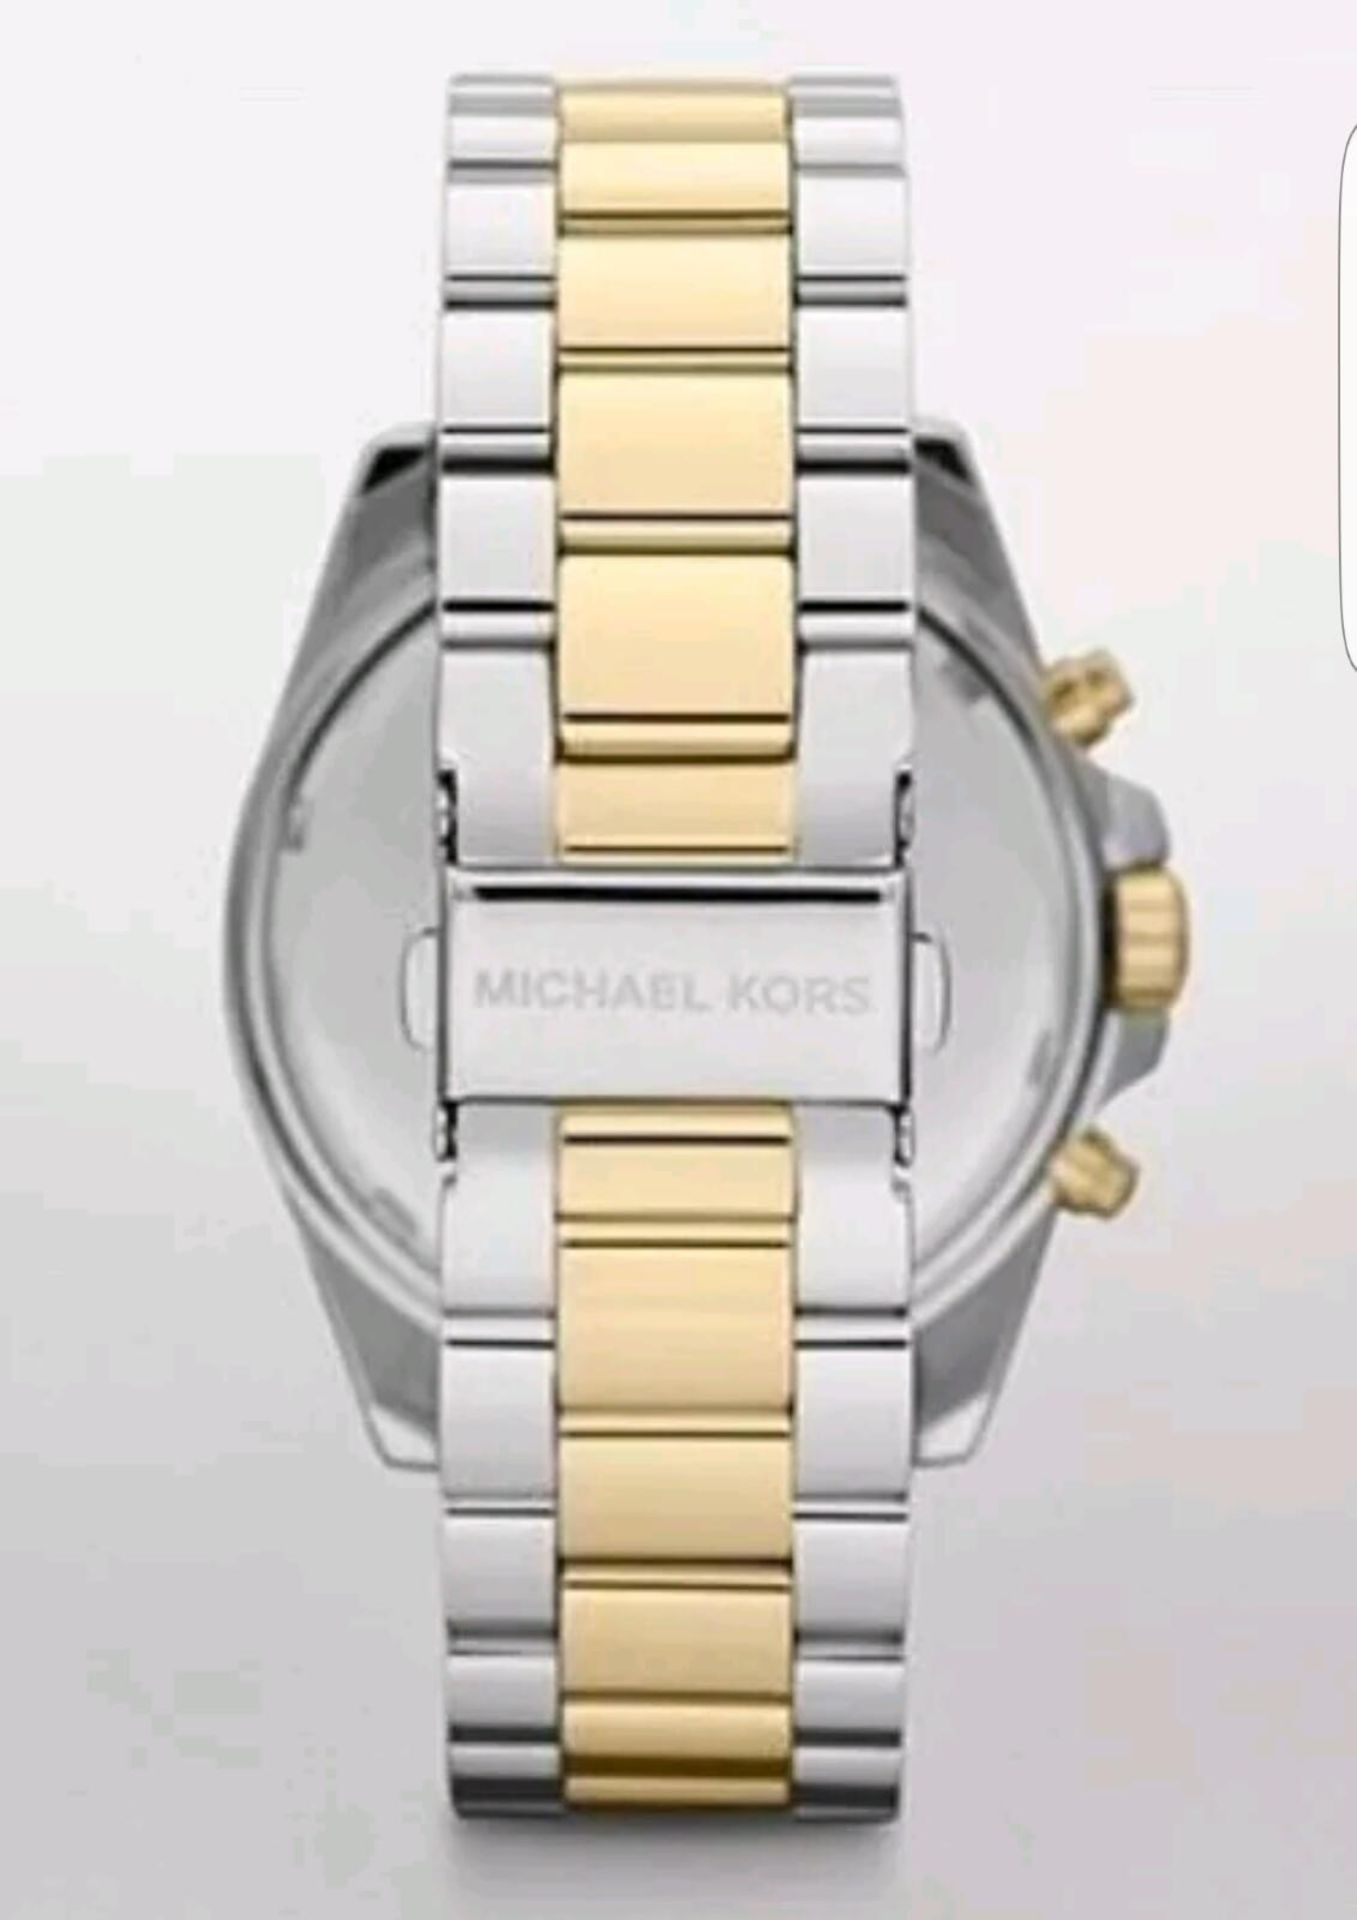 BRAND NEW LADIES MICHAEL KORS WATCH MK5627, COMPLETE WITH ORIGINAL BOX AND MANUAL - FREE P & P - Image 2 of 2